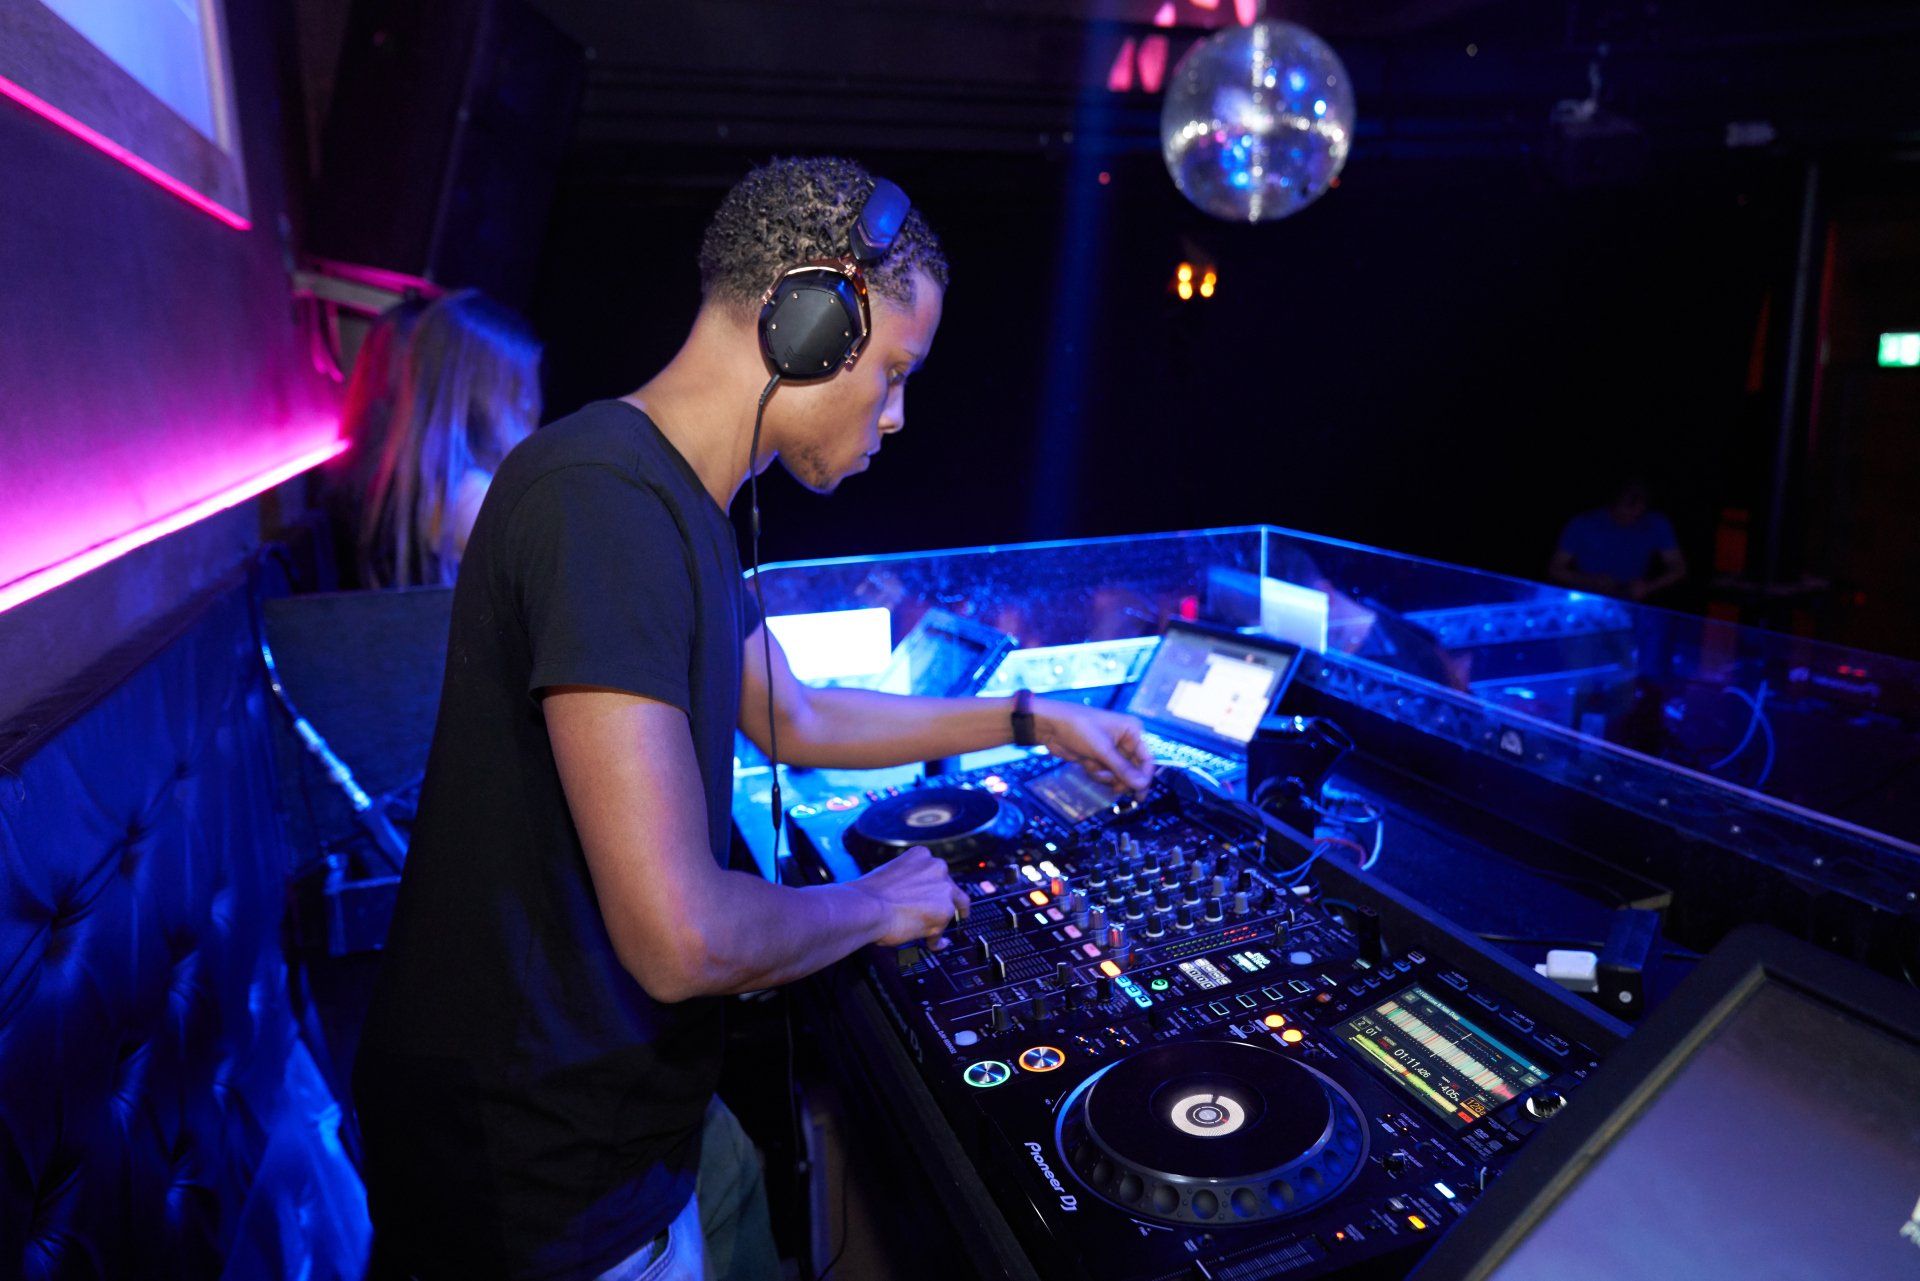 A DJ with headphoes on, turning the dials to adjust the music